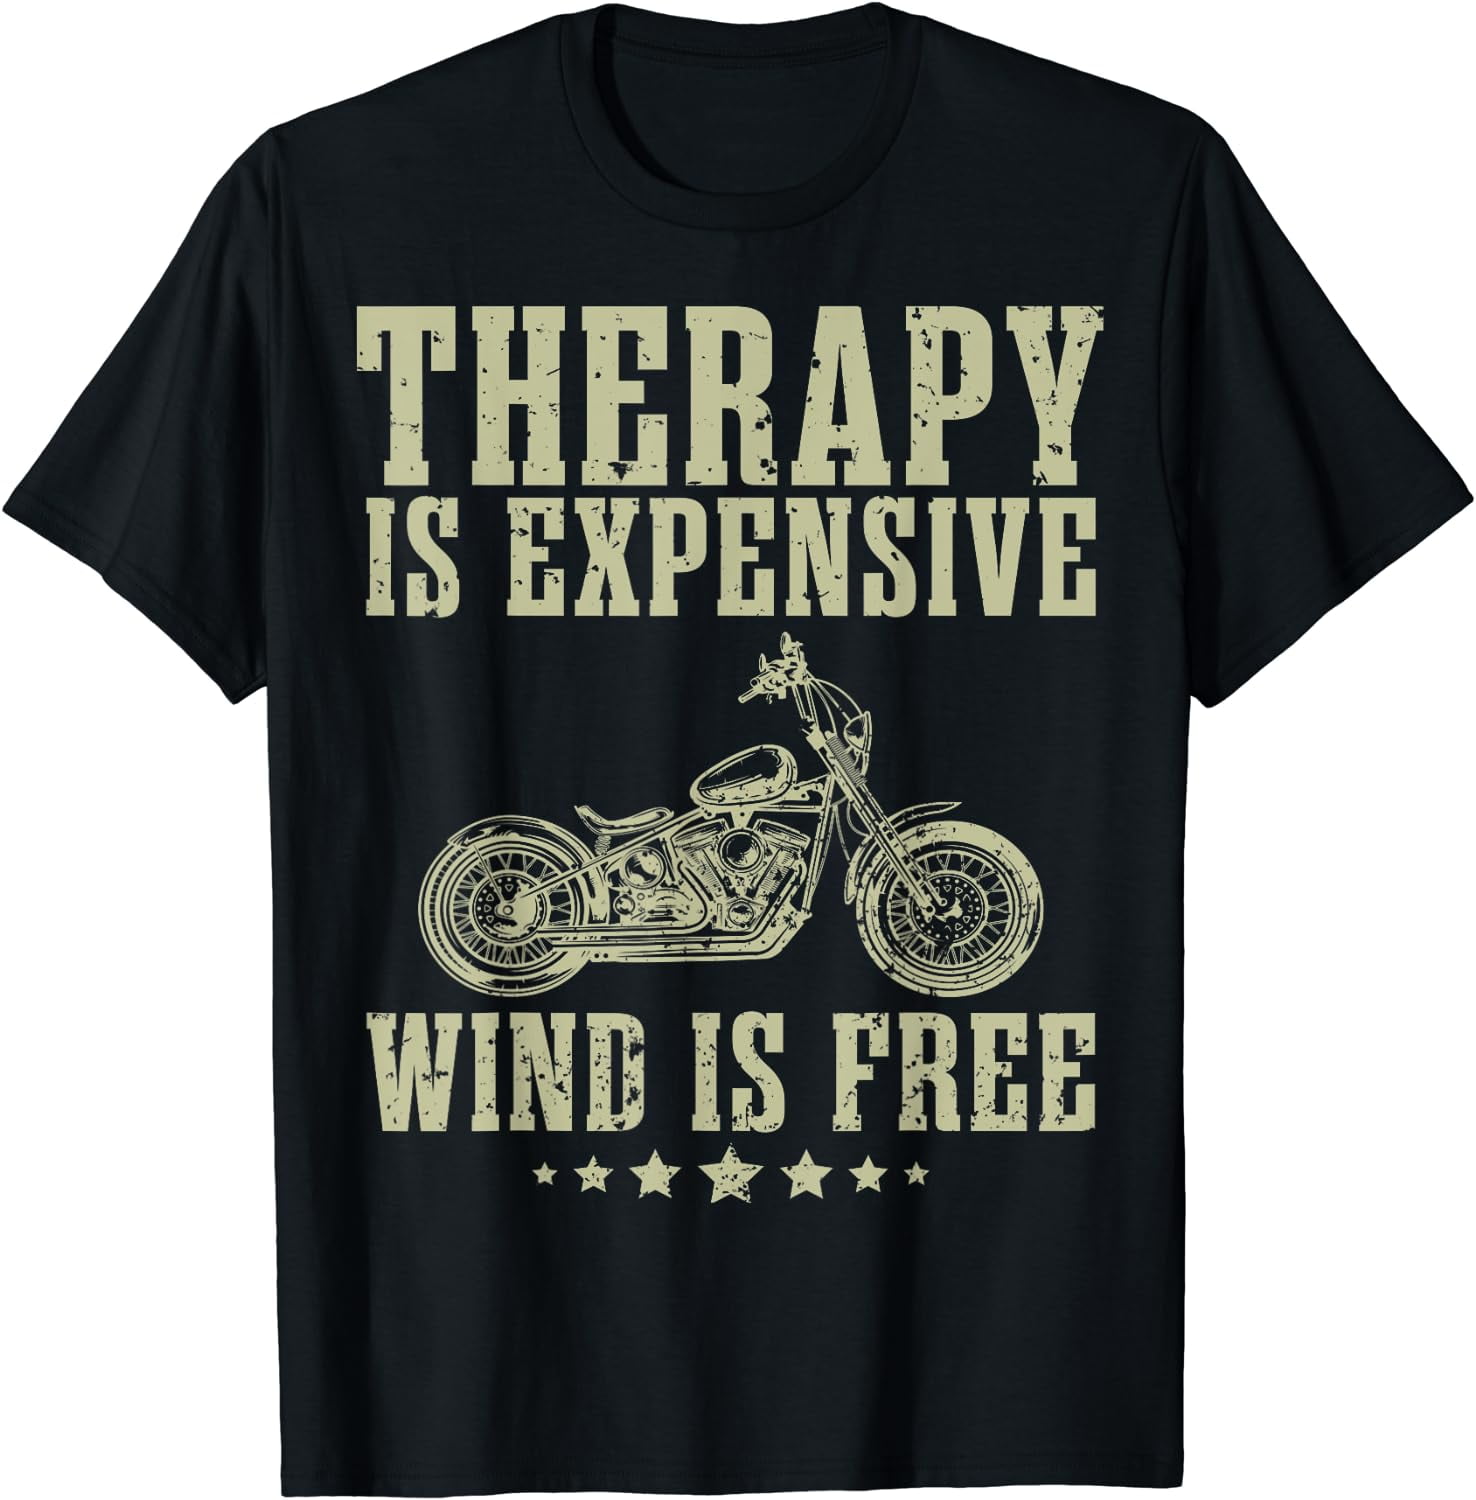 Motorcycle Shirt Therapy Is Expensive Wind Is Free Biker T-Shirt ...